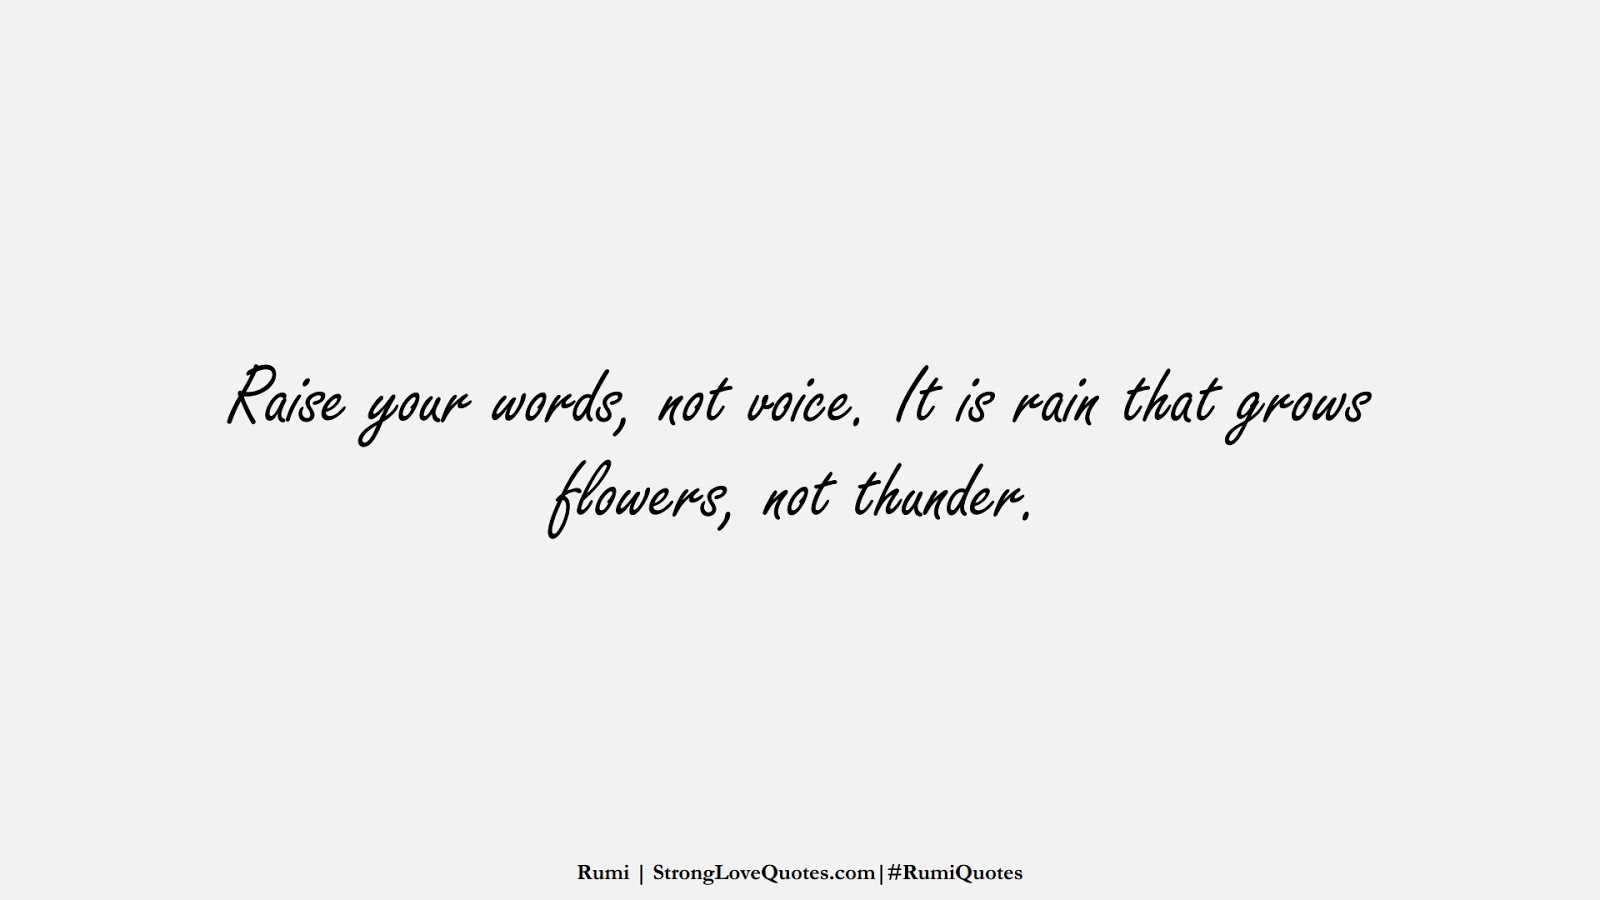 Raise your words, not voice. It is rain that grows flowers, not thunder. (Rumi);  #RumiQuotes